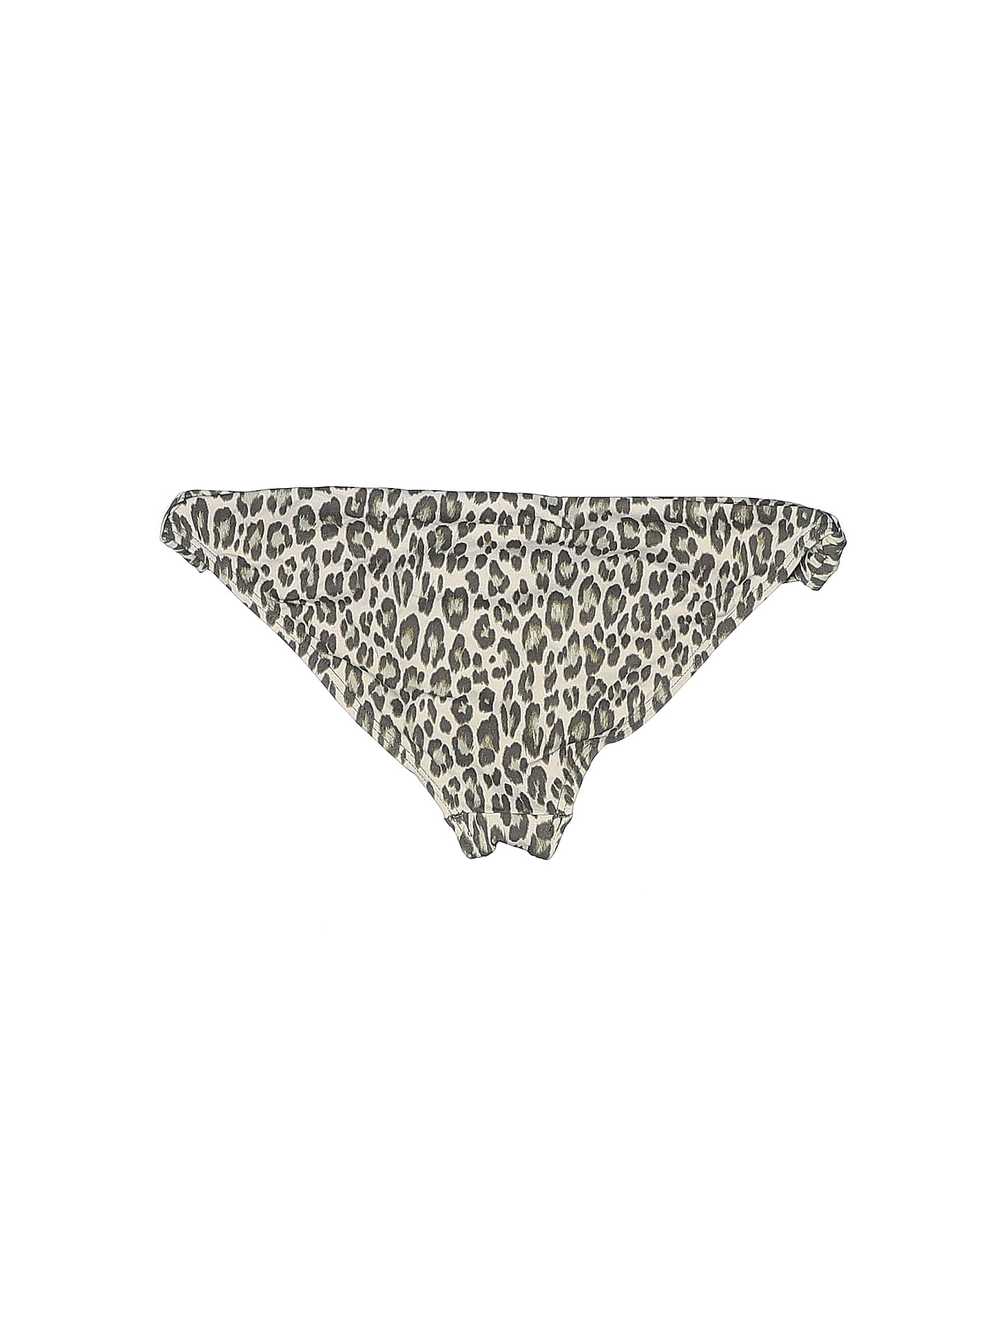 Tommy Bahama Women Silver Swimsuit Bottoms M - image 2